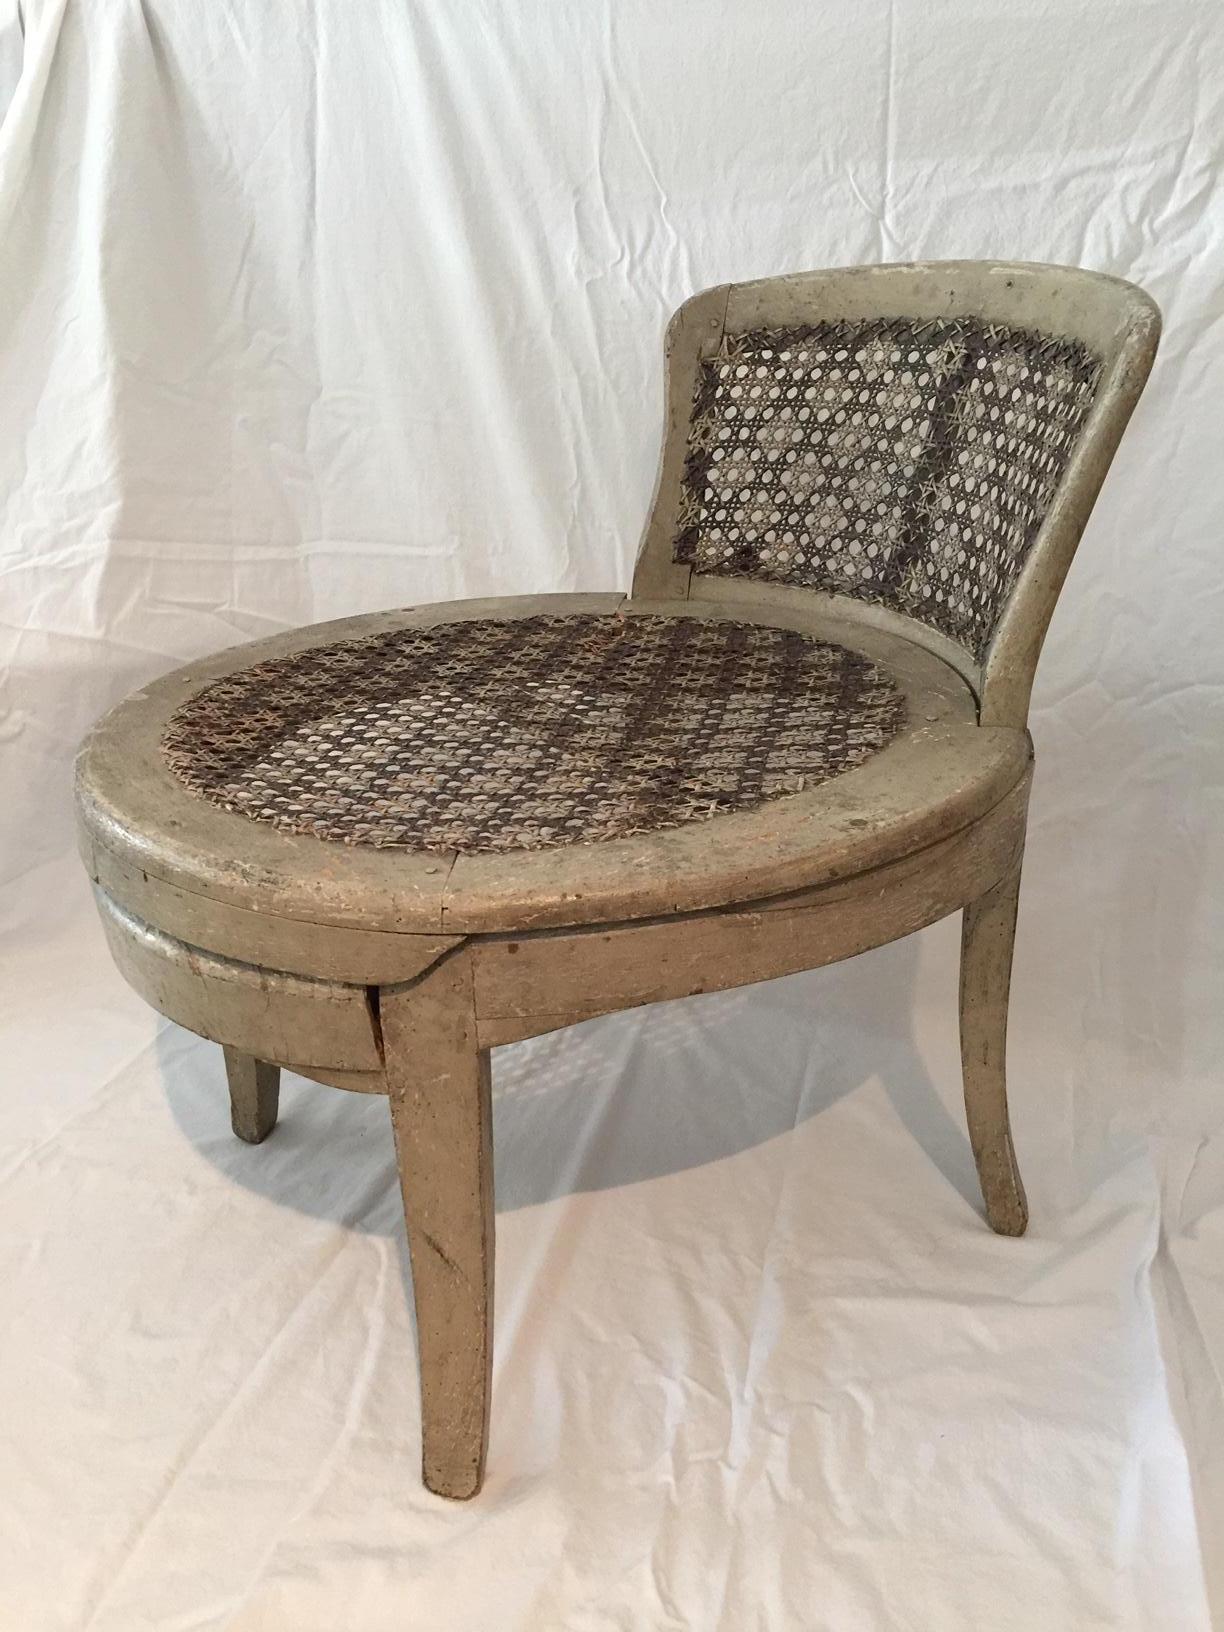 French Louis XVI low caned fireside slipper chair, 18th century.
This very rare and exceptional low chair is very old, and has withstood the test of time in a remarkably good state, with a minor loss to the base of the caning in a lower corner of